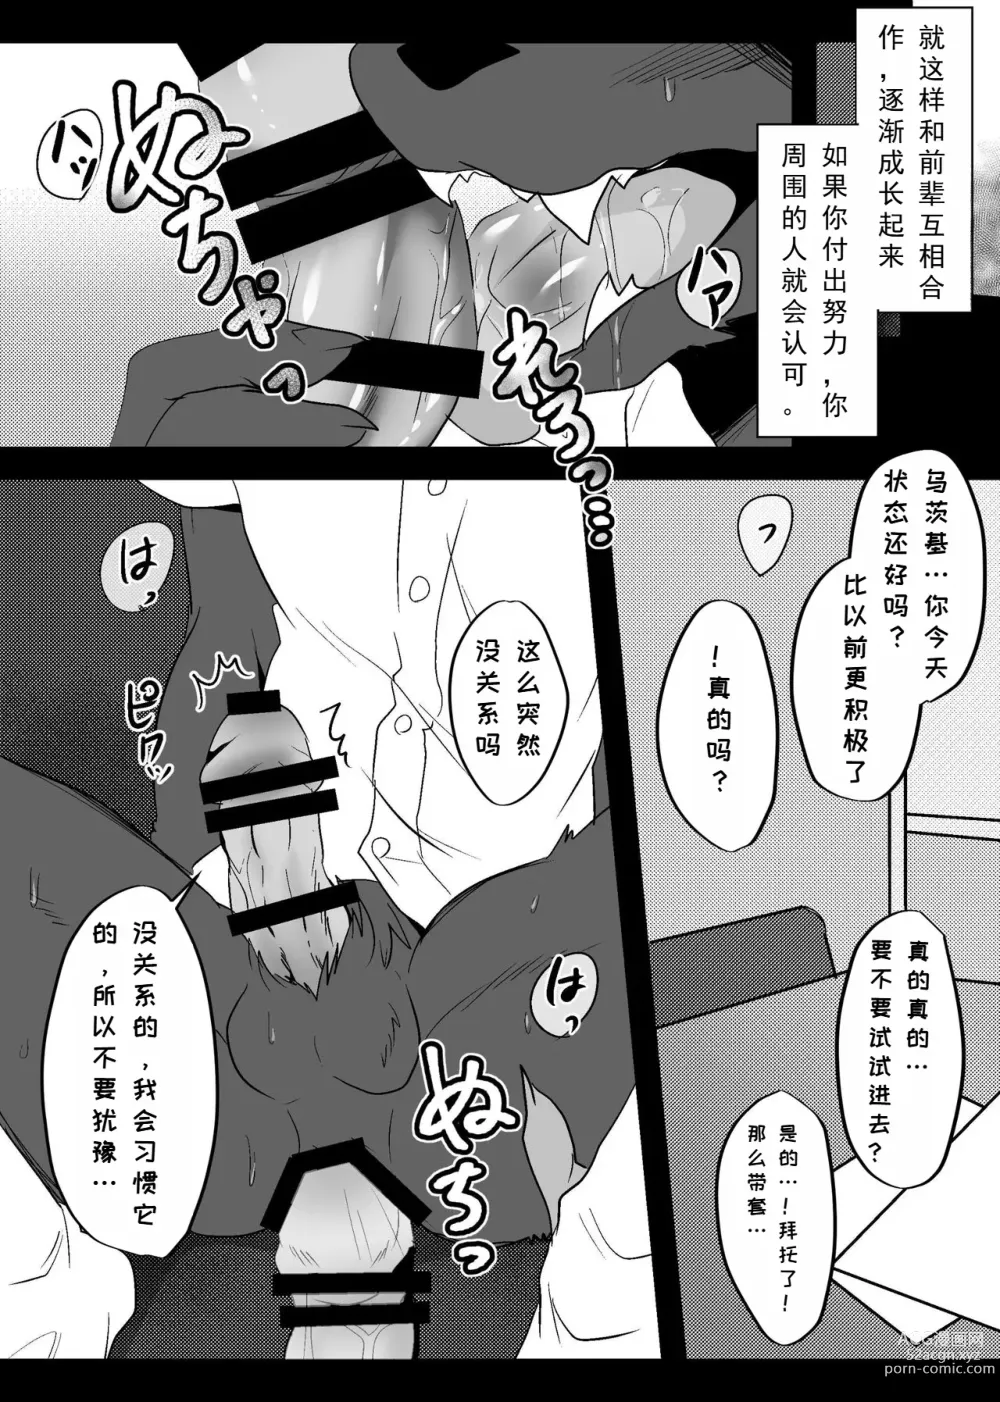 Page 17 of doujinshi 我们发情出勤科 2